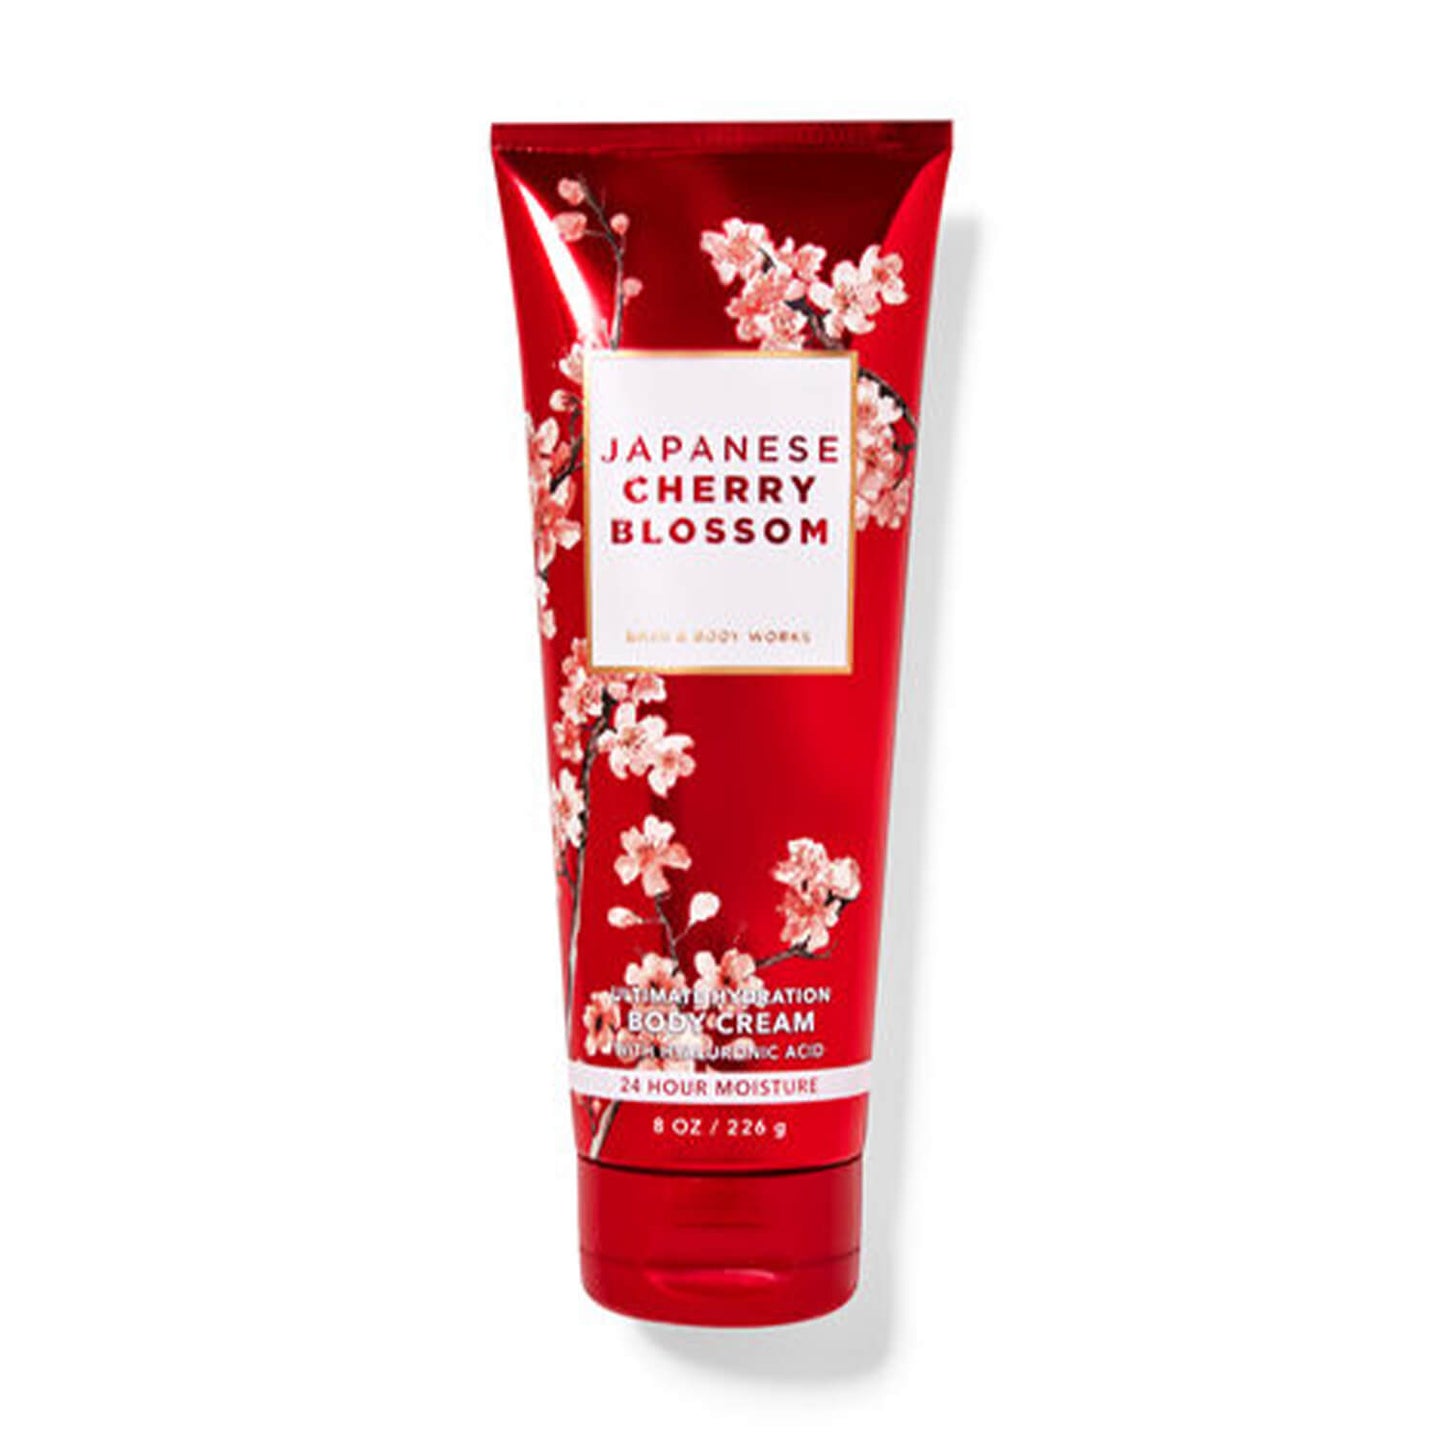 shop bath and body works body cream in Japanese cherry blossom fragrance available at heygirl.pk for delivery in Pakistan